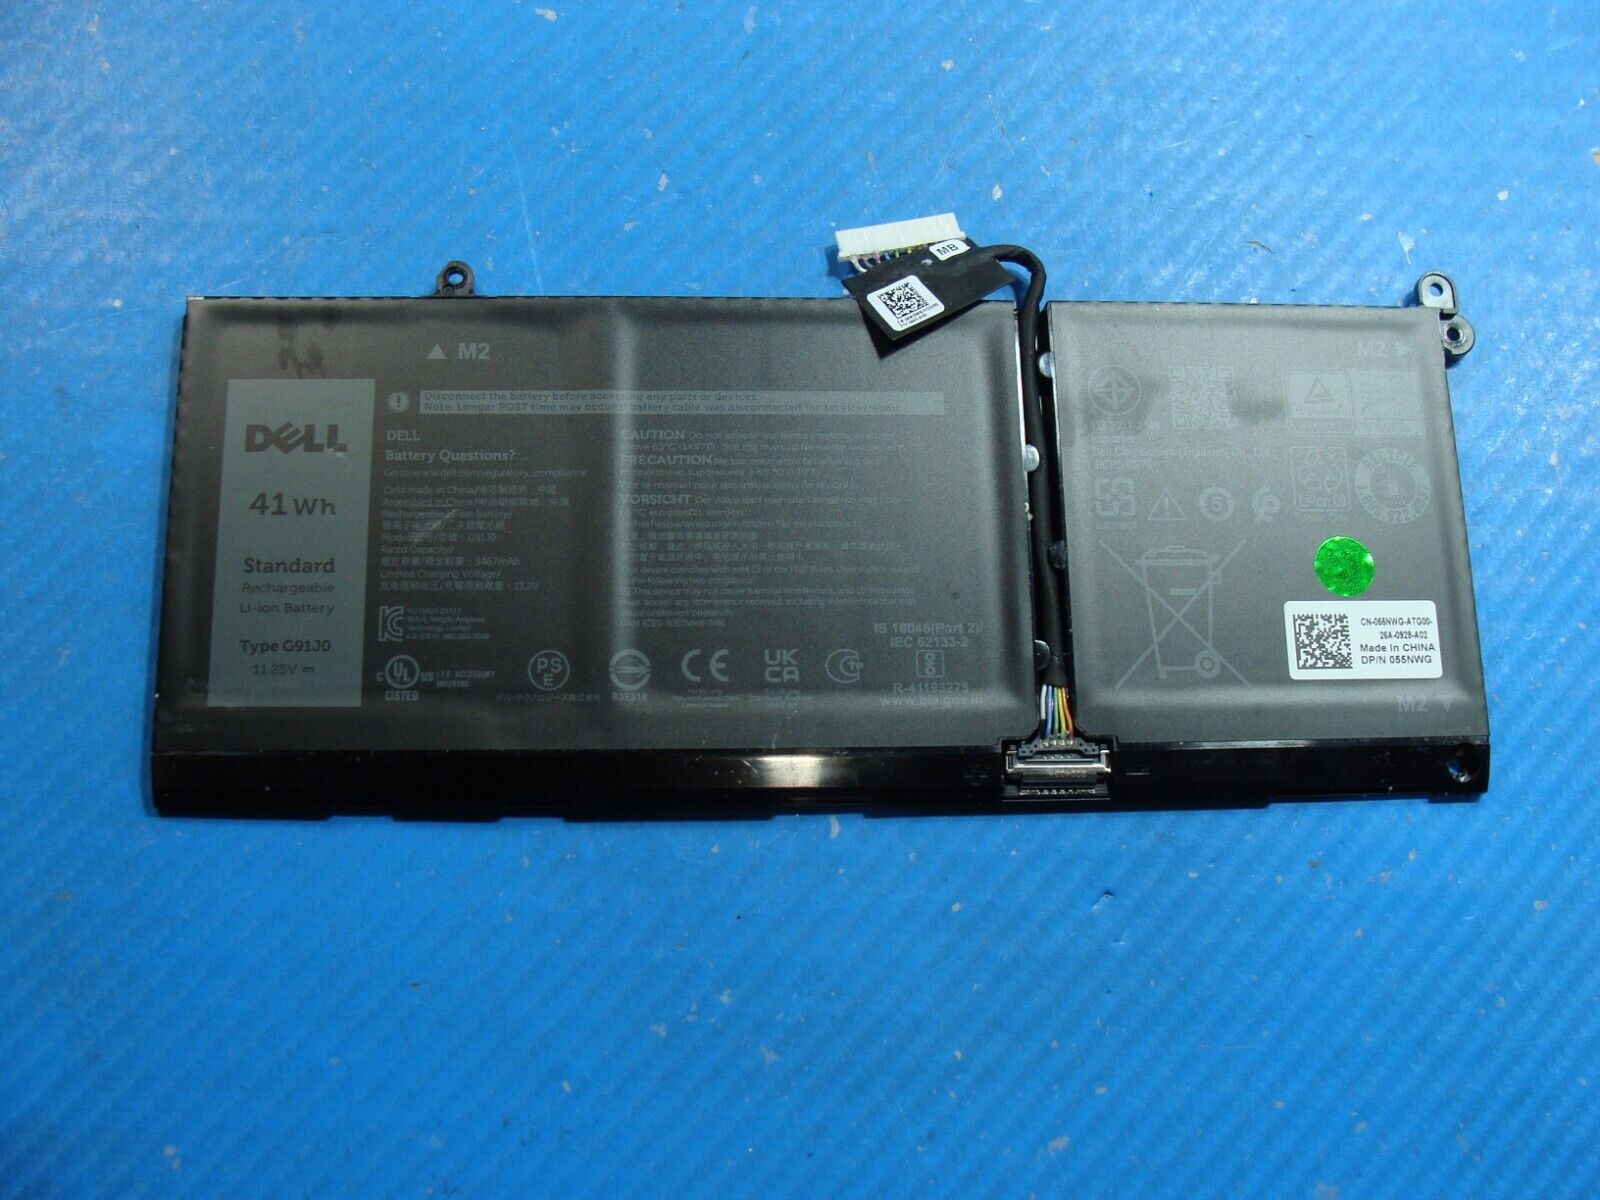 Dell Inspiron 15.6” 15 3511 11.25V 41Wh 3467mAh Battery 55NWG G91J0 Excellent